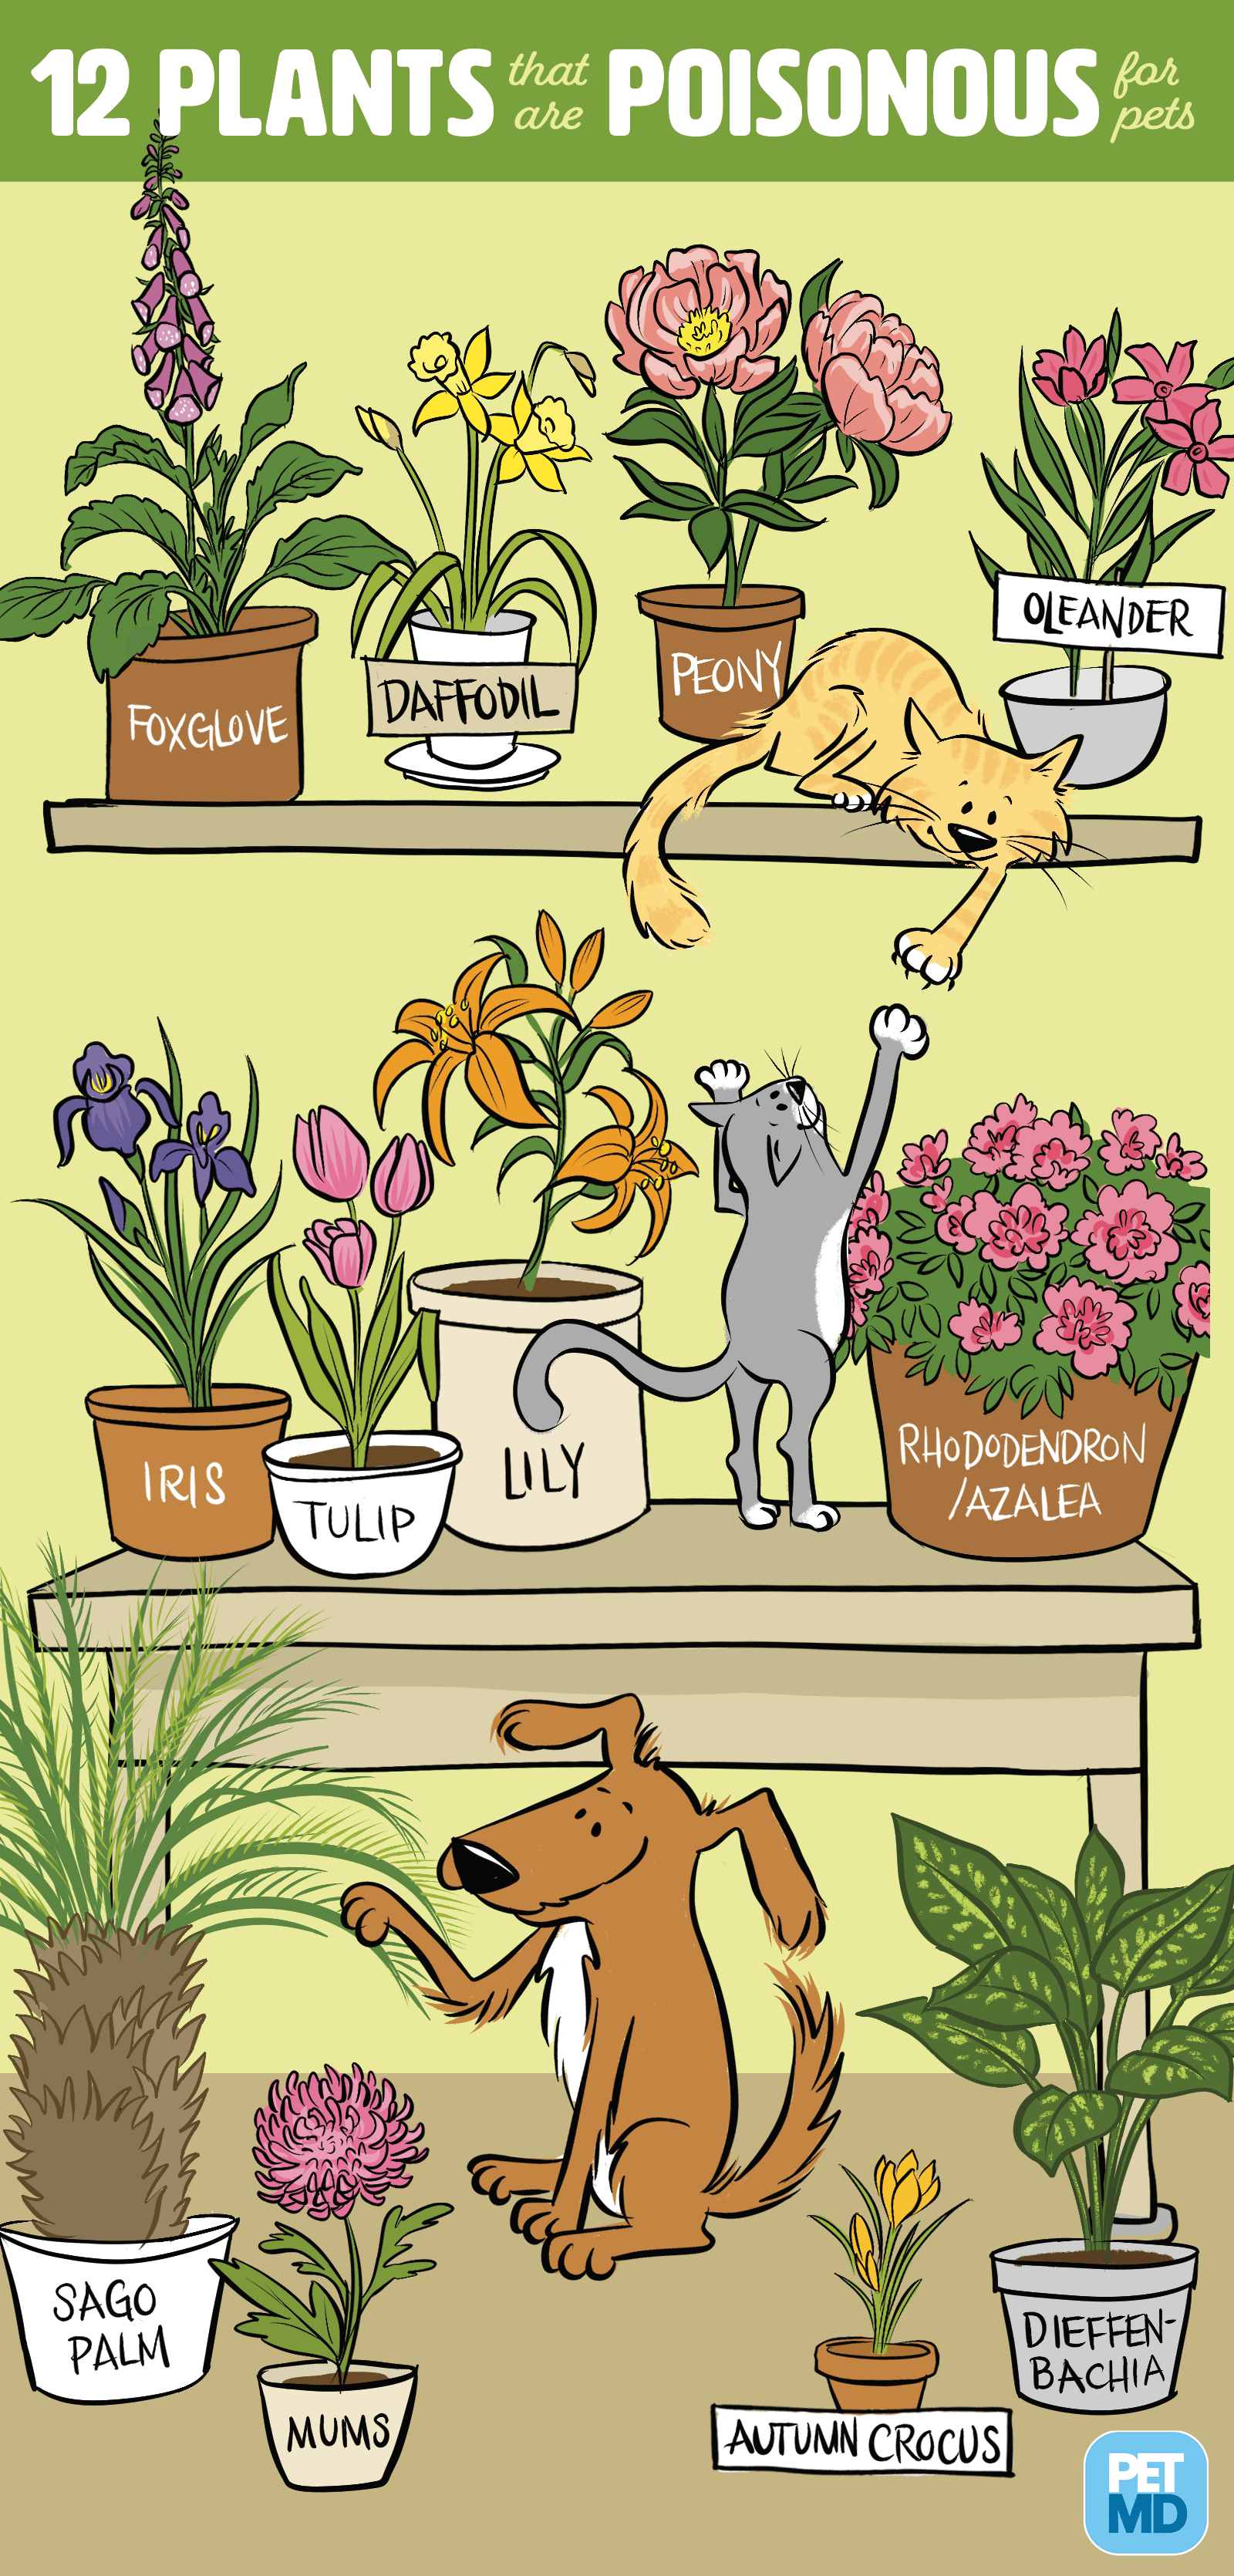 Poisonous Plants for Dogs | PetMD